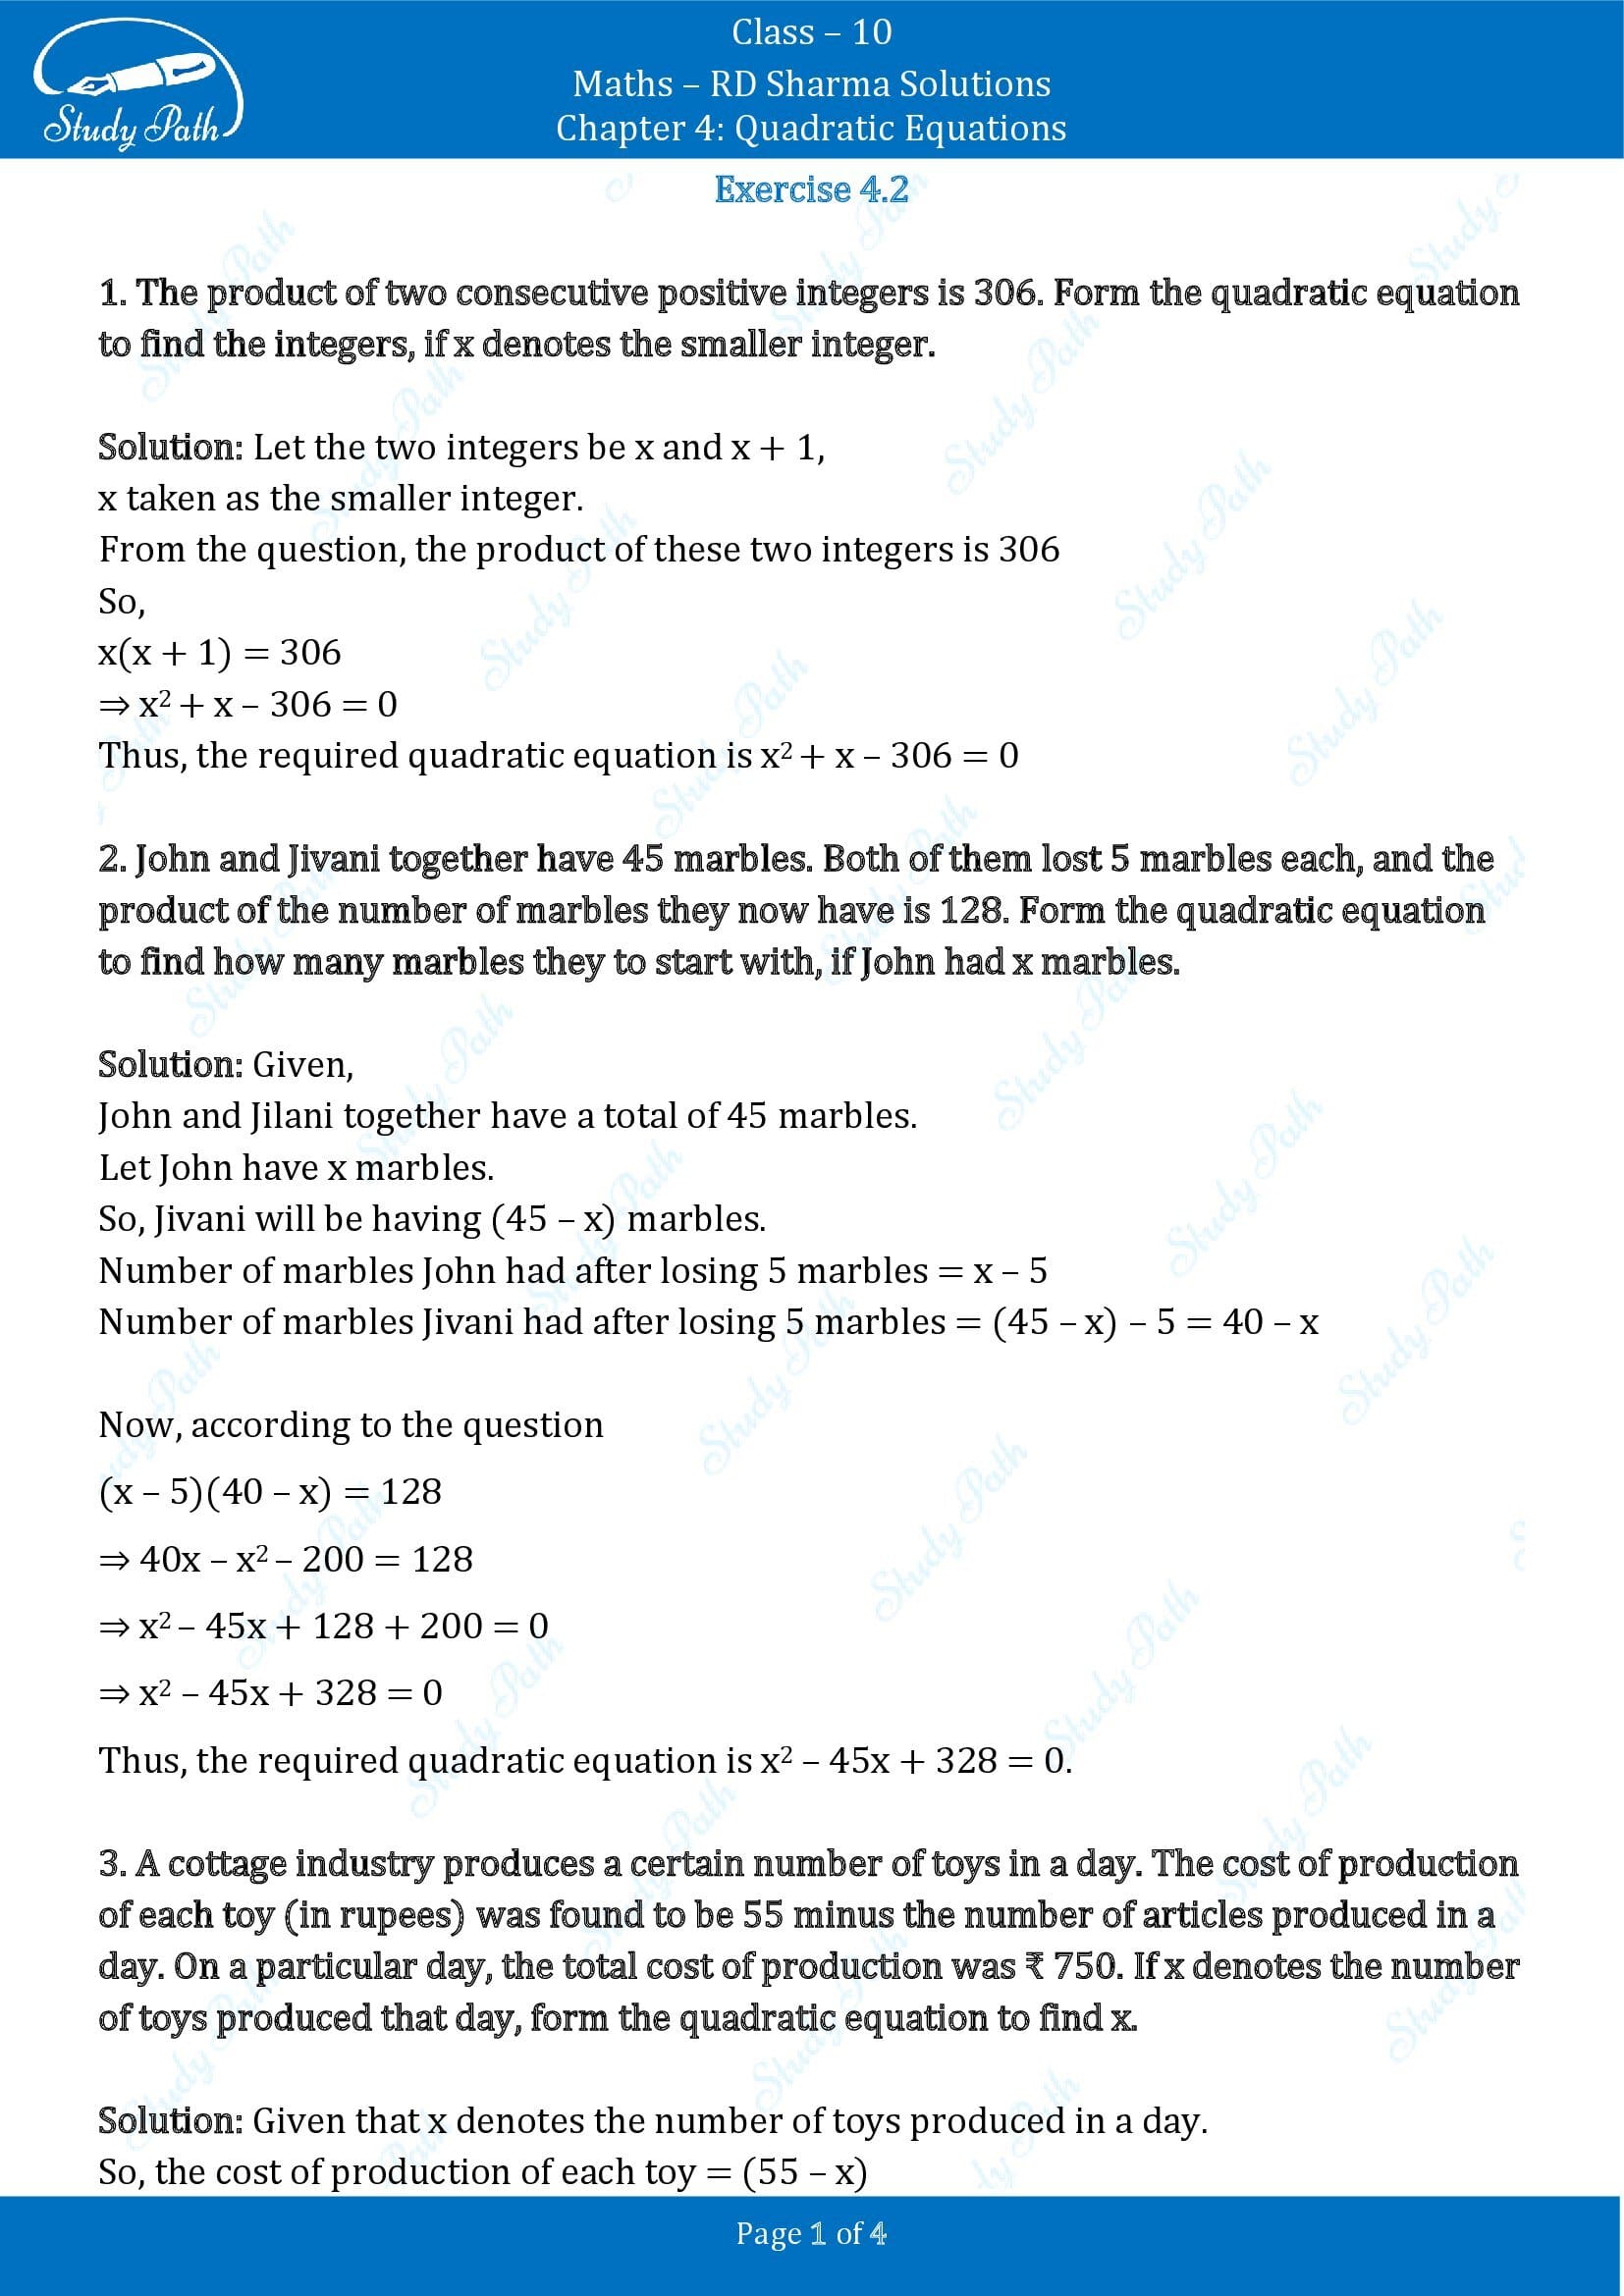 RD Sharma Solutions Class 10 Chapter 4 Quadratic Equations Exercise 4.2 0001